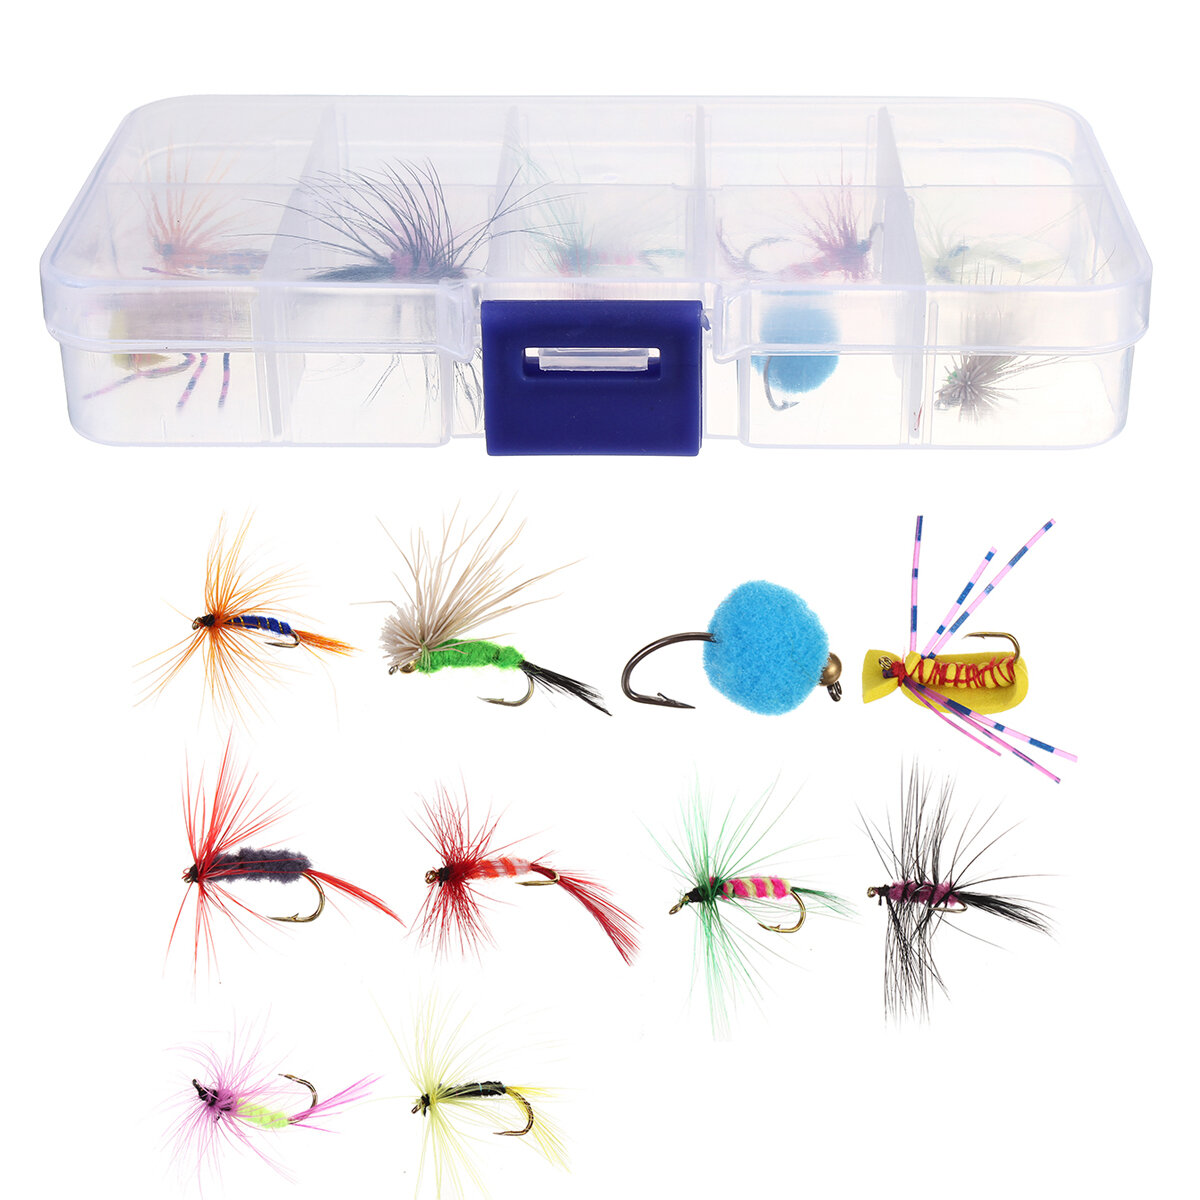 

ZANLURE 10 Pcs Fishing Lures Trout Fly Fishing Baits Floating Insect Fishing Tackle with Storage Box